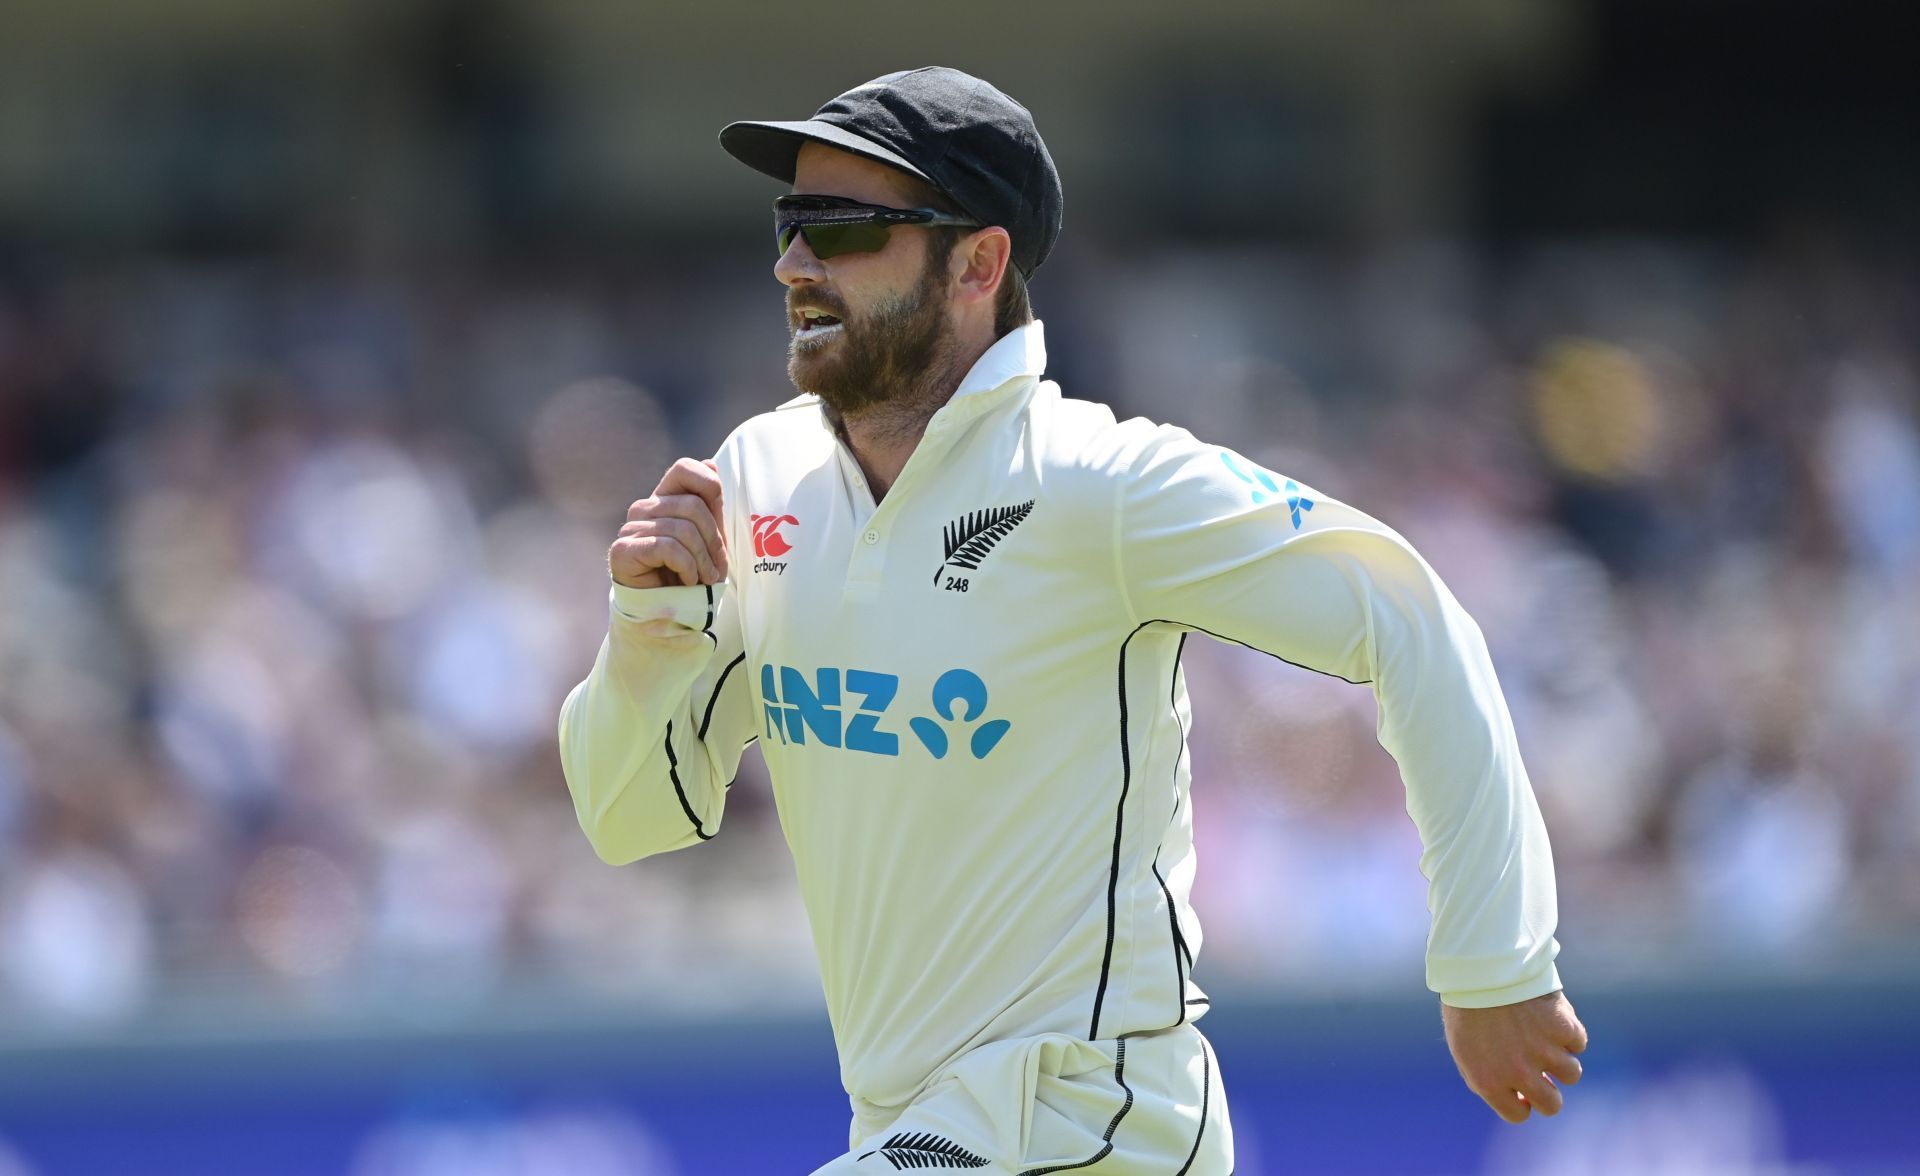 Kane Williamson will lead New Zealand in the final Test against England. (Credits: Getty Images)